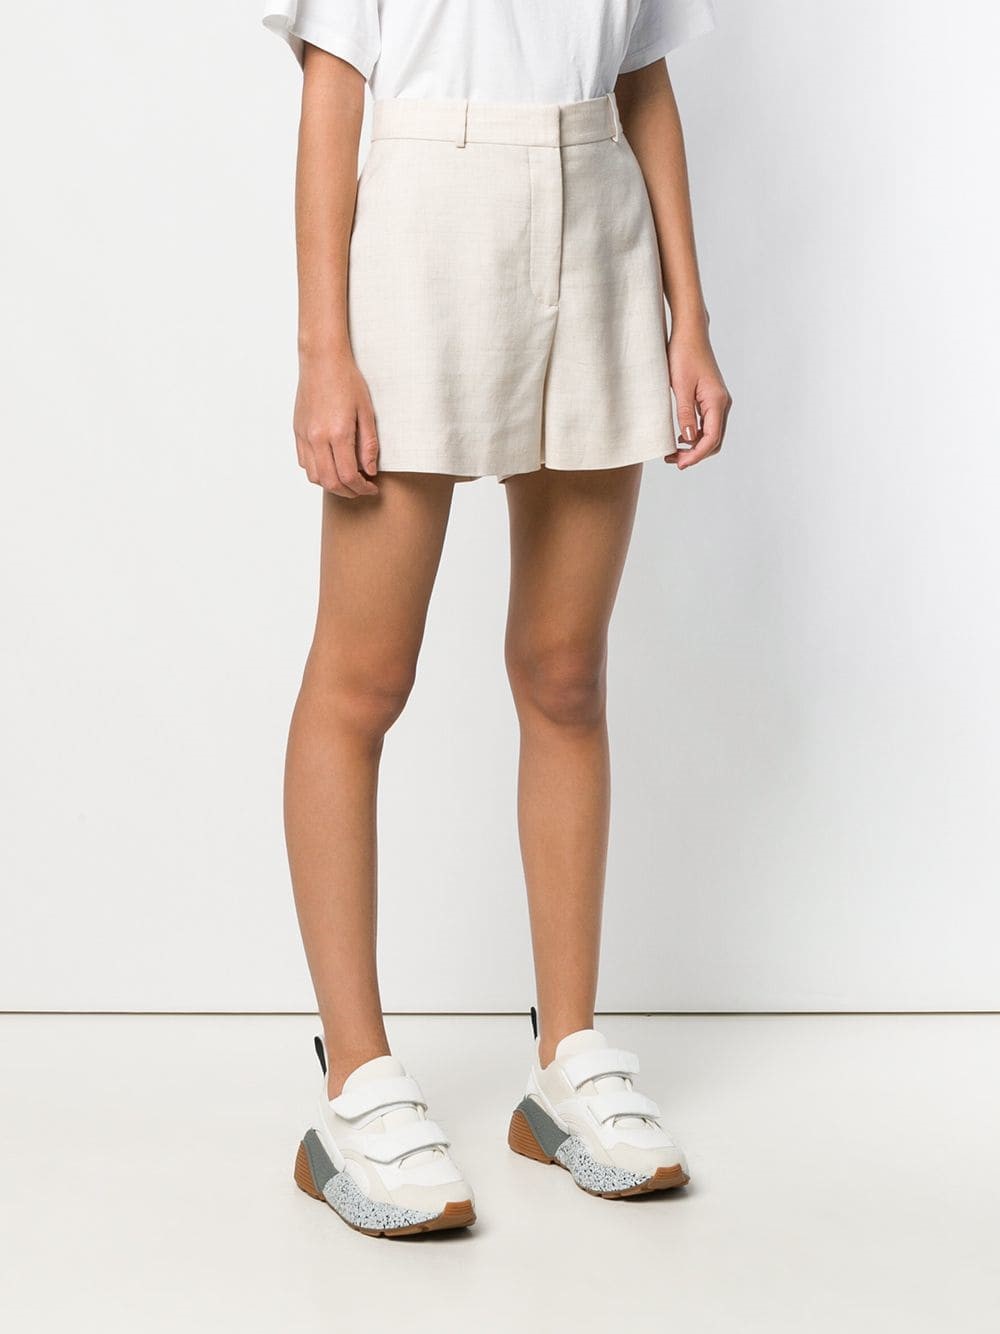 stella mccartney SHORTS available on montiboutique.com - 28062